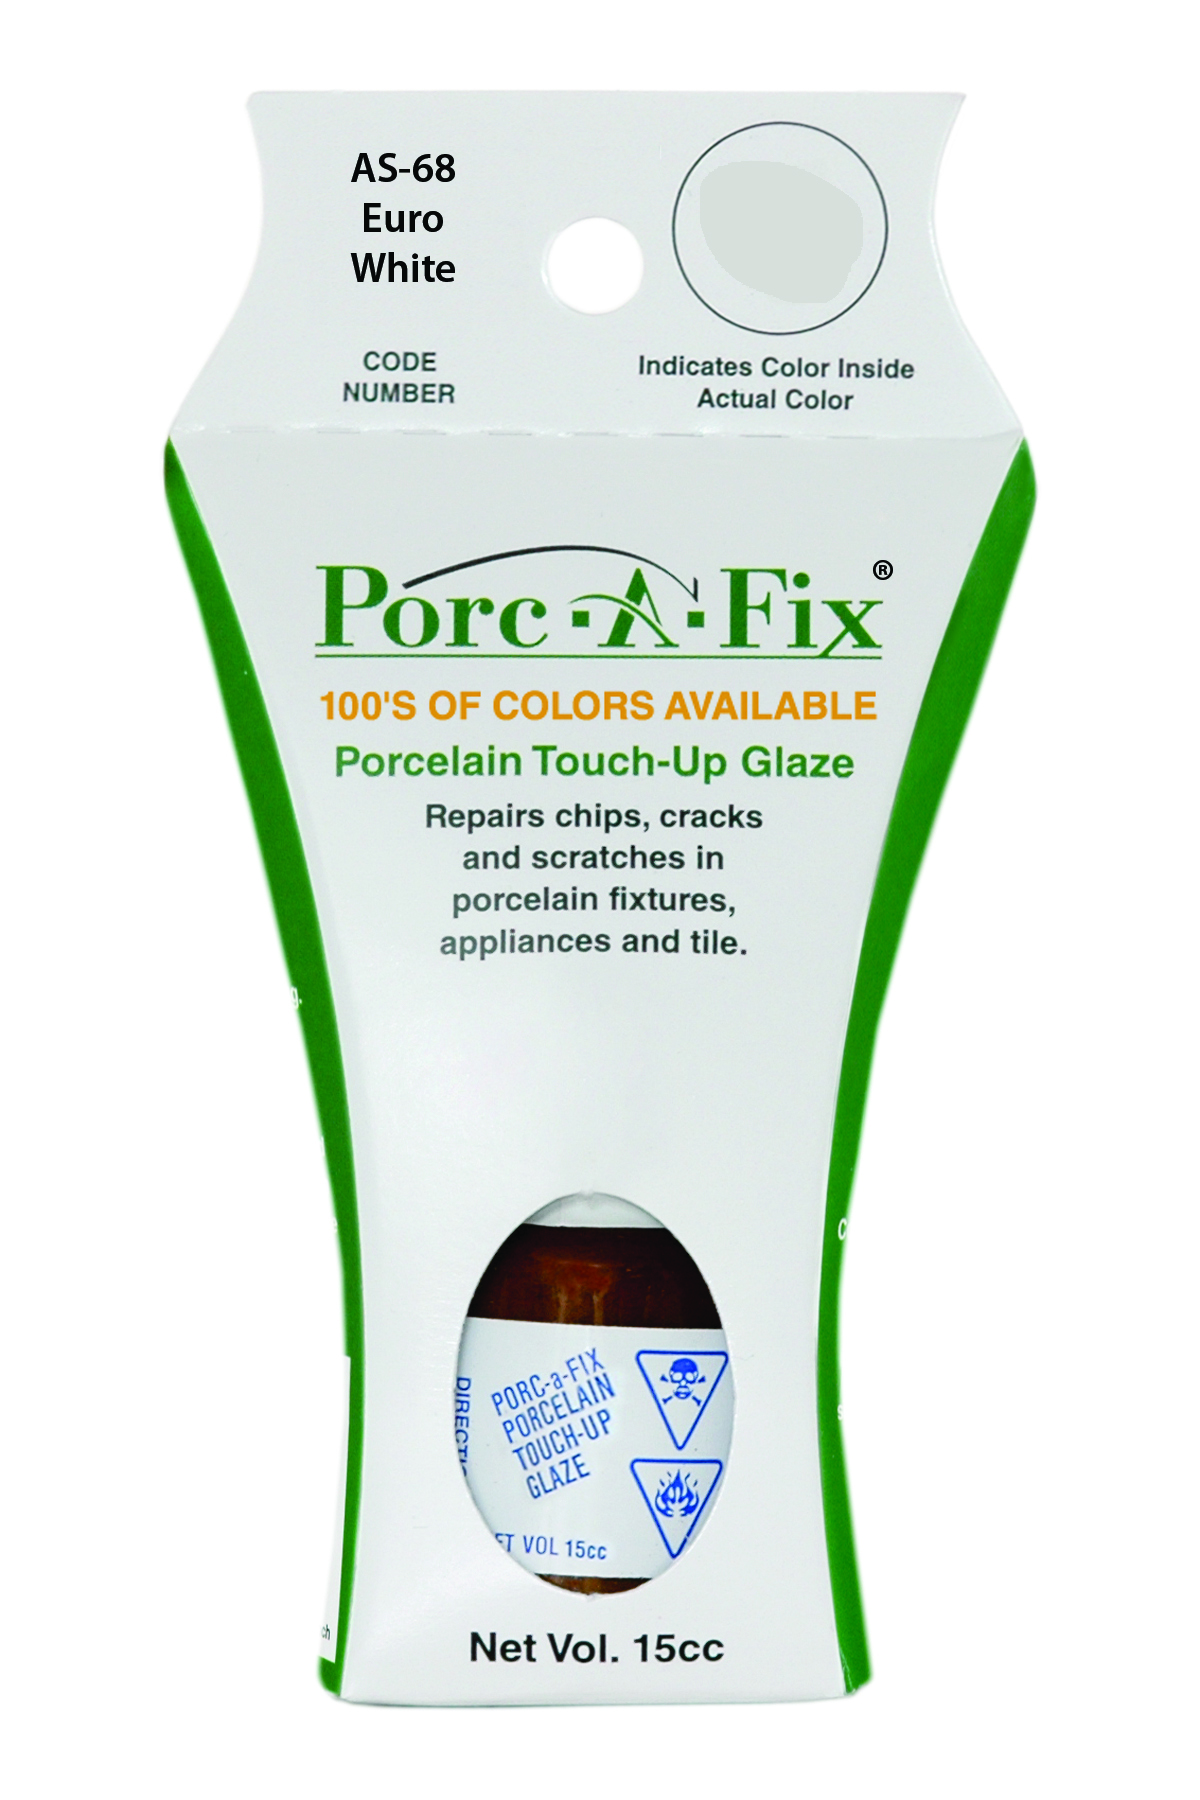 Fixture-Fix | AS-68 | Porc-A-Fix Touch-Up Glaze American Standard Euro White - Compatible with American Standard 070900-2150A Touch Up Paint Kit - EURO WHITE